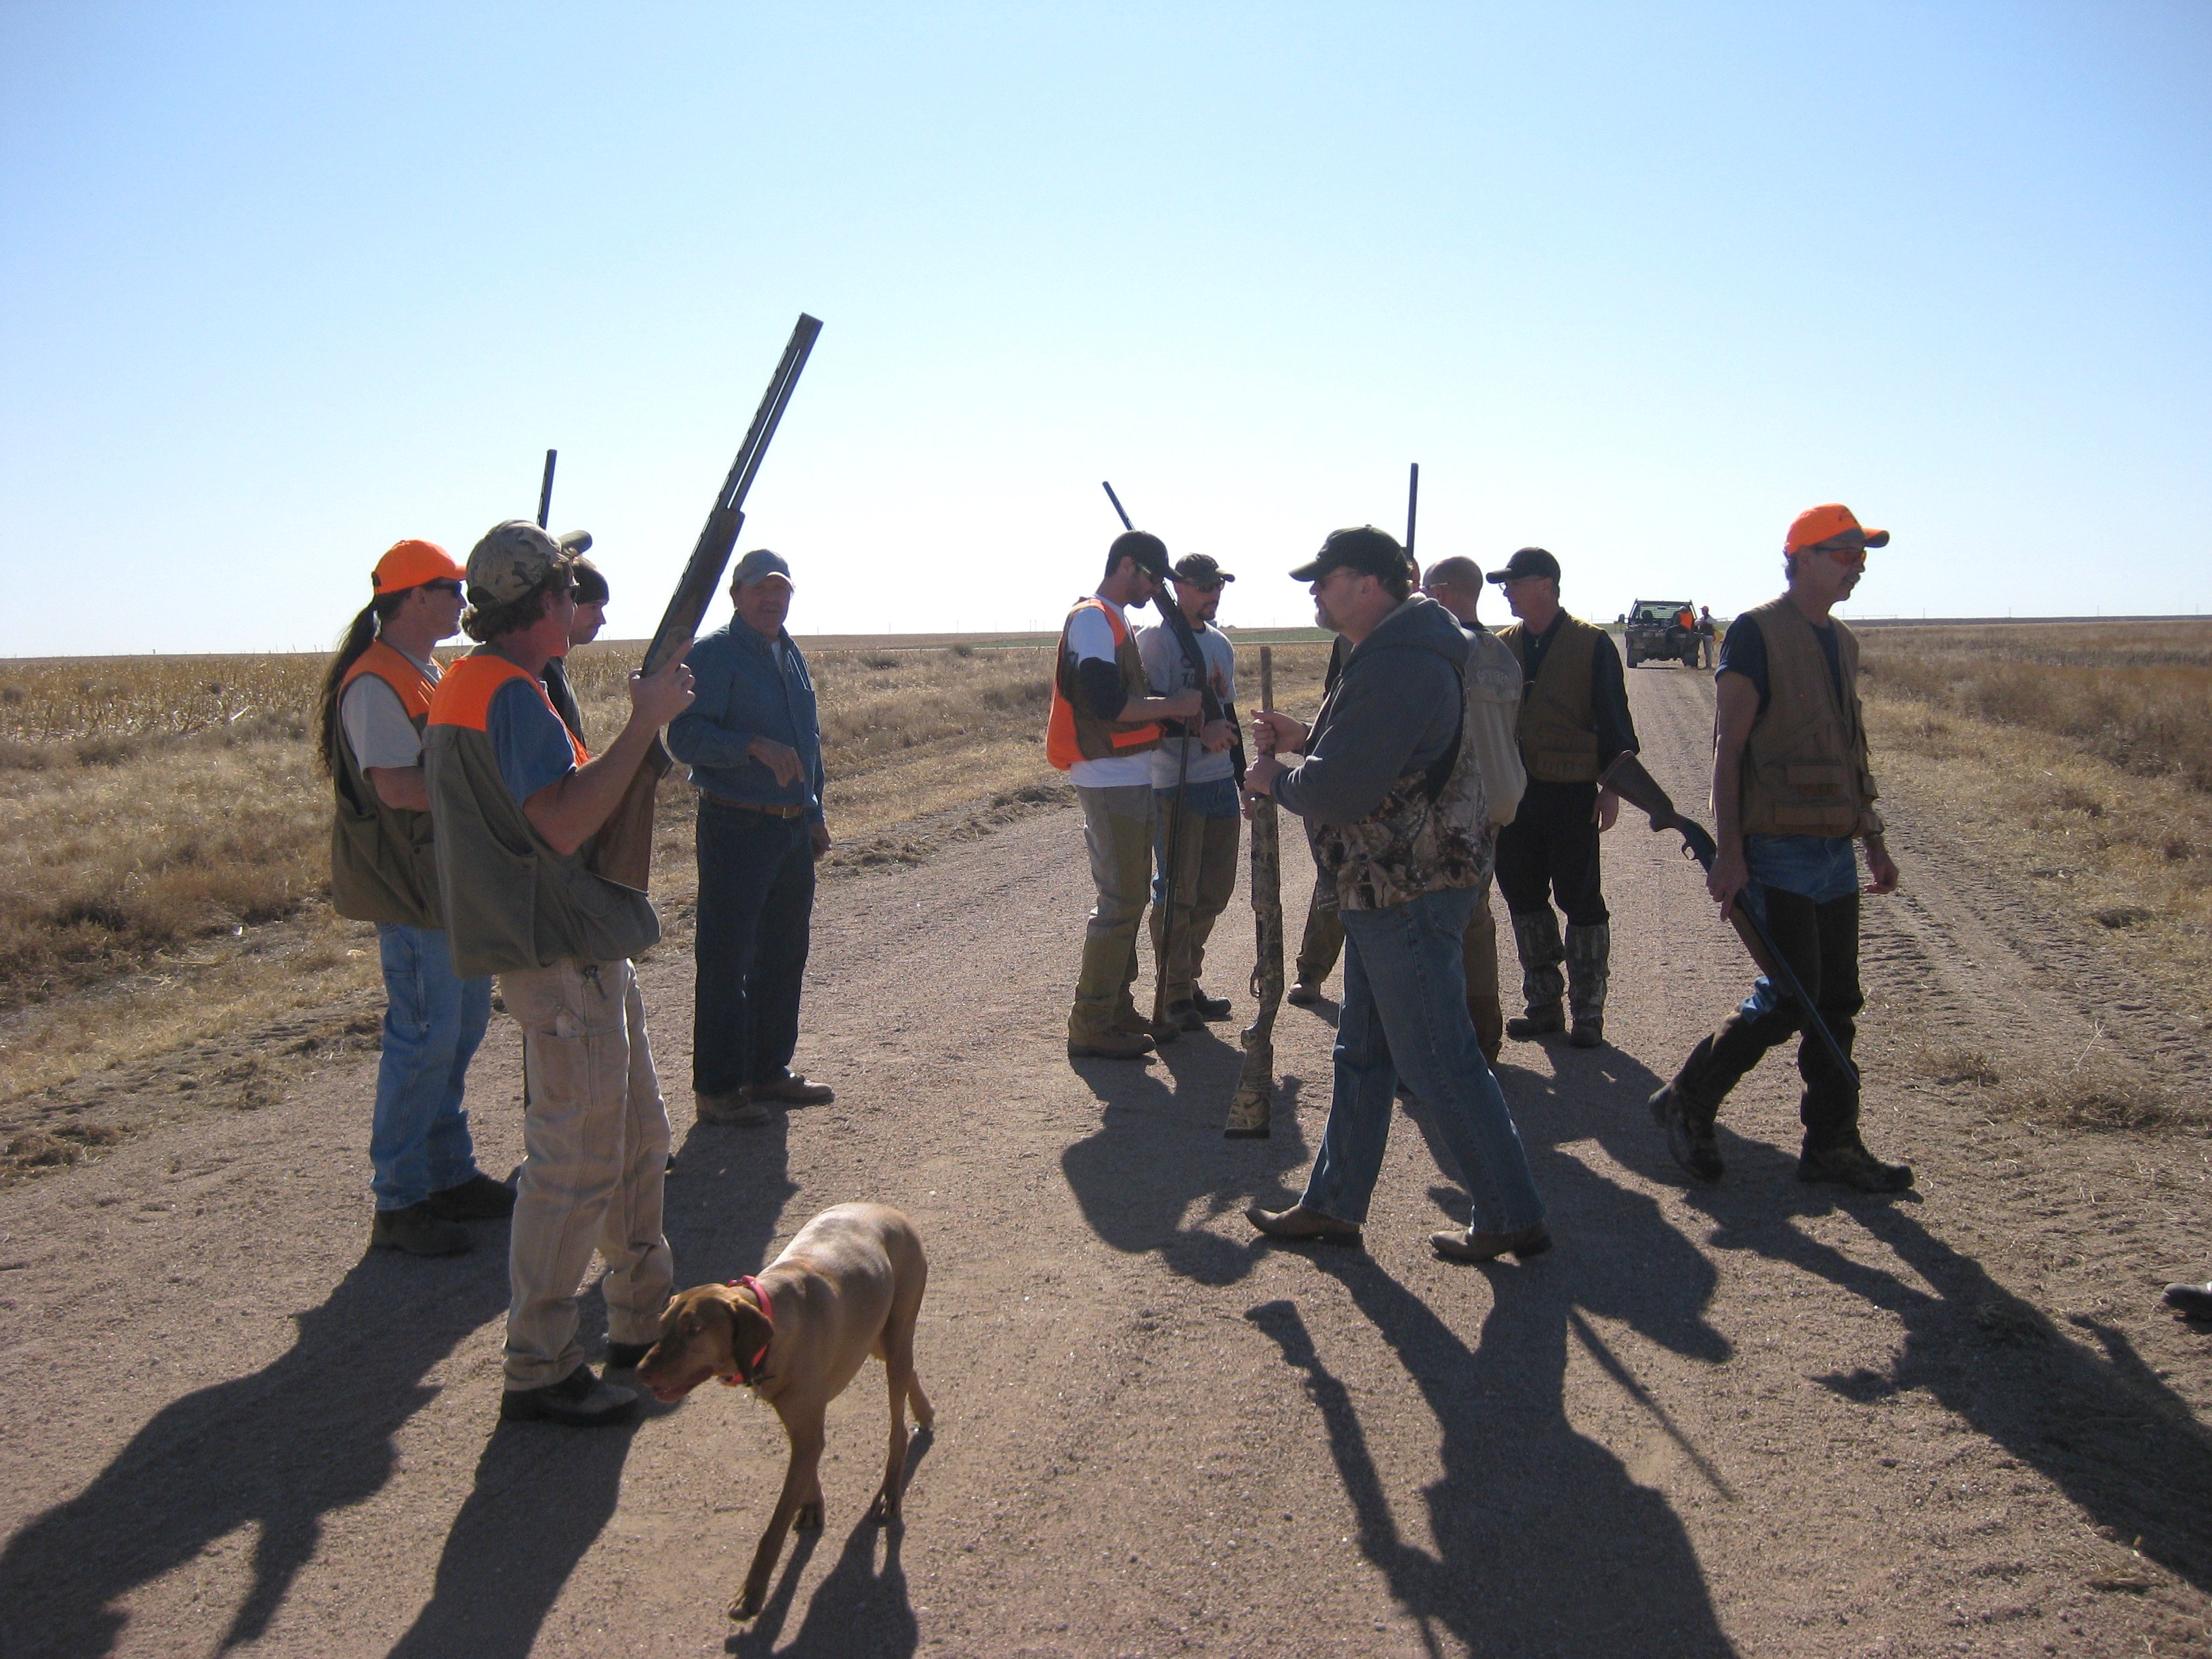 The hunting group getting ready